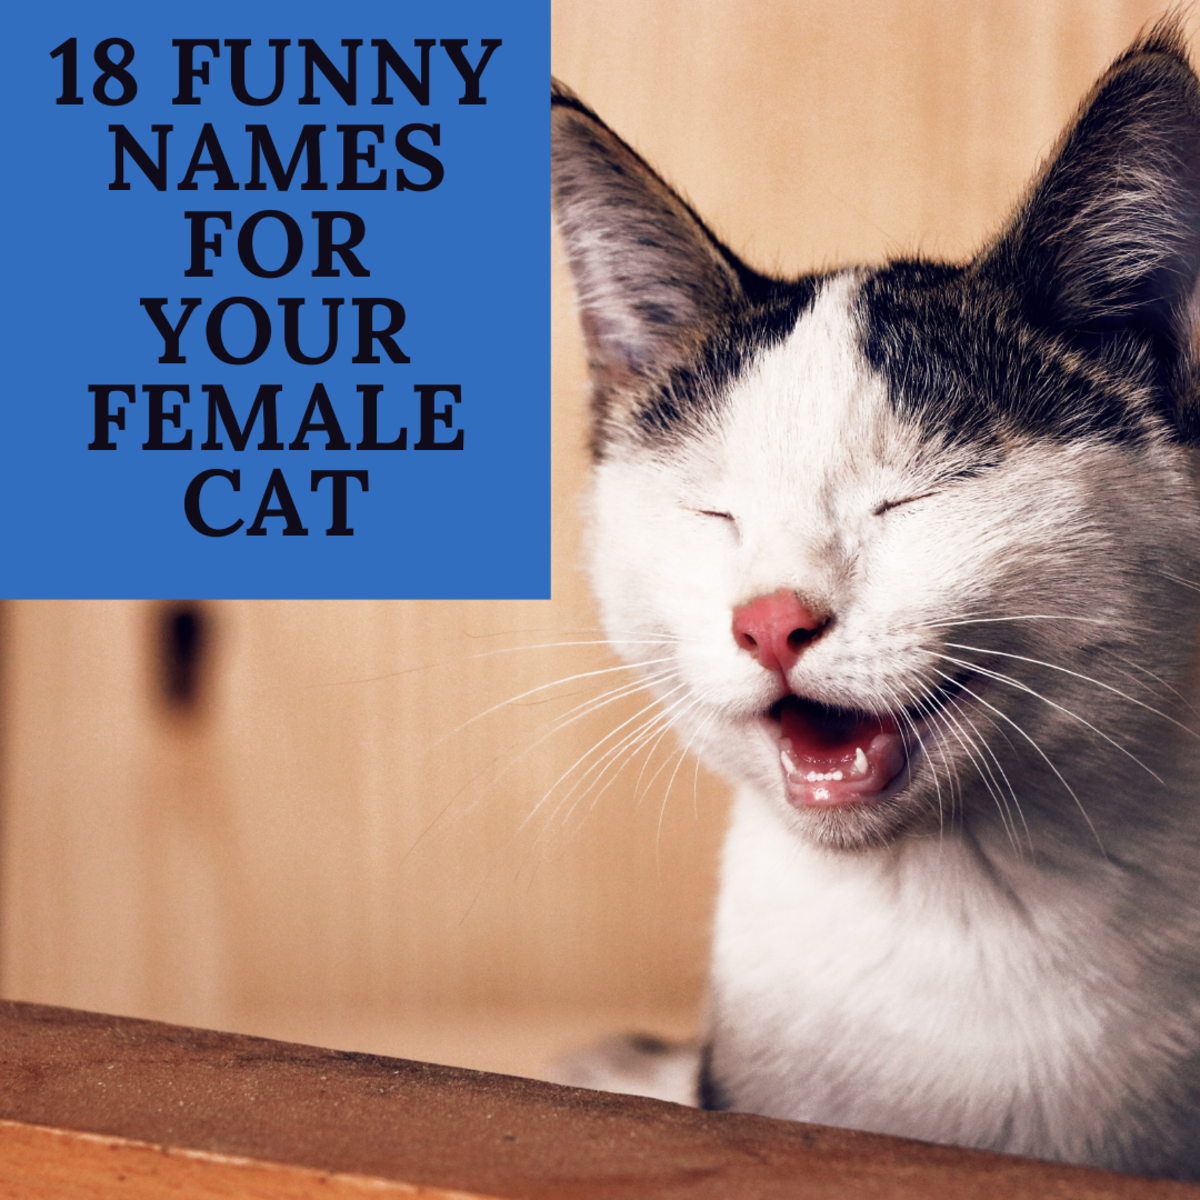 Some of these funny cat names will really crack you up.